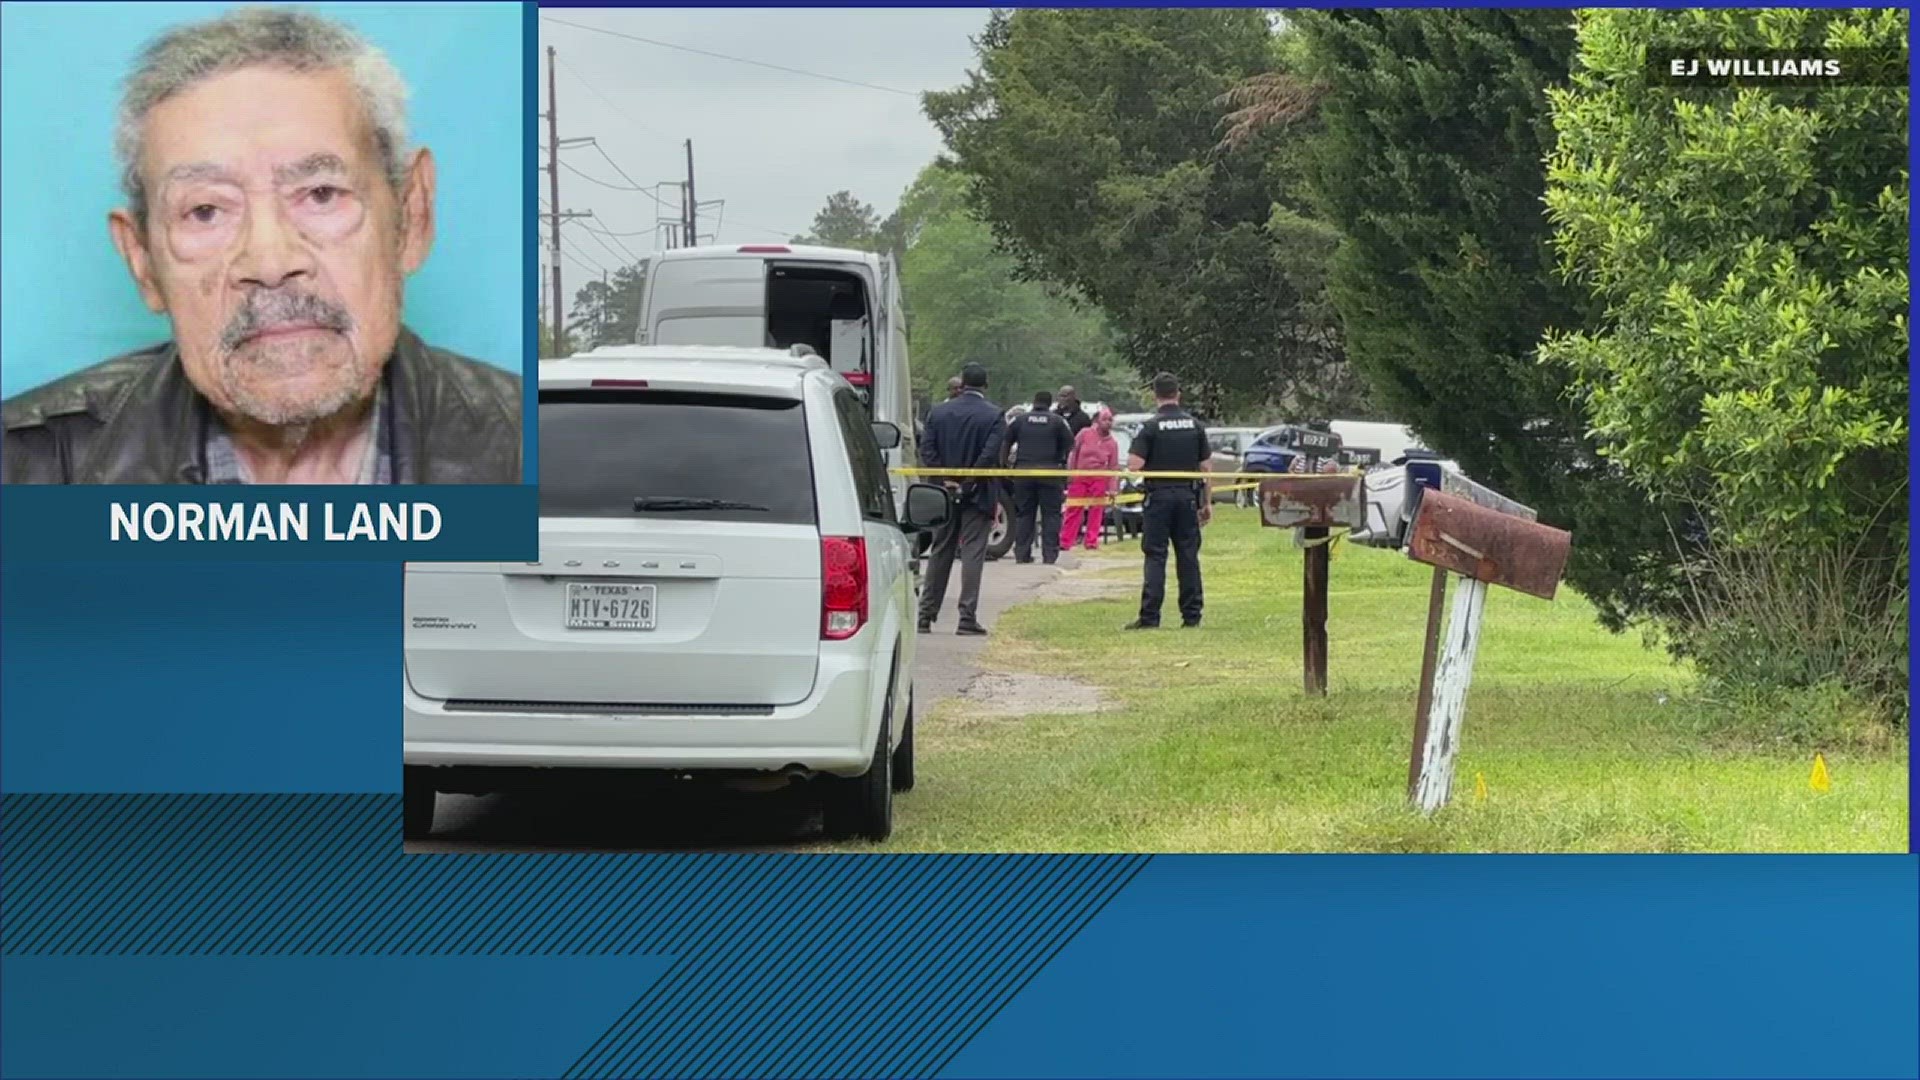 While helping EMS with a medical call, Beaumont Police found an 87-year-old who was wanted in connection with a deadly Thursday morning shooting.